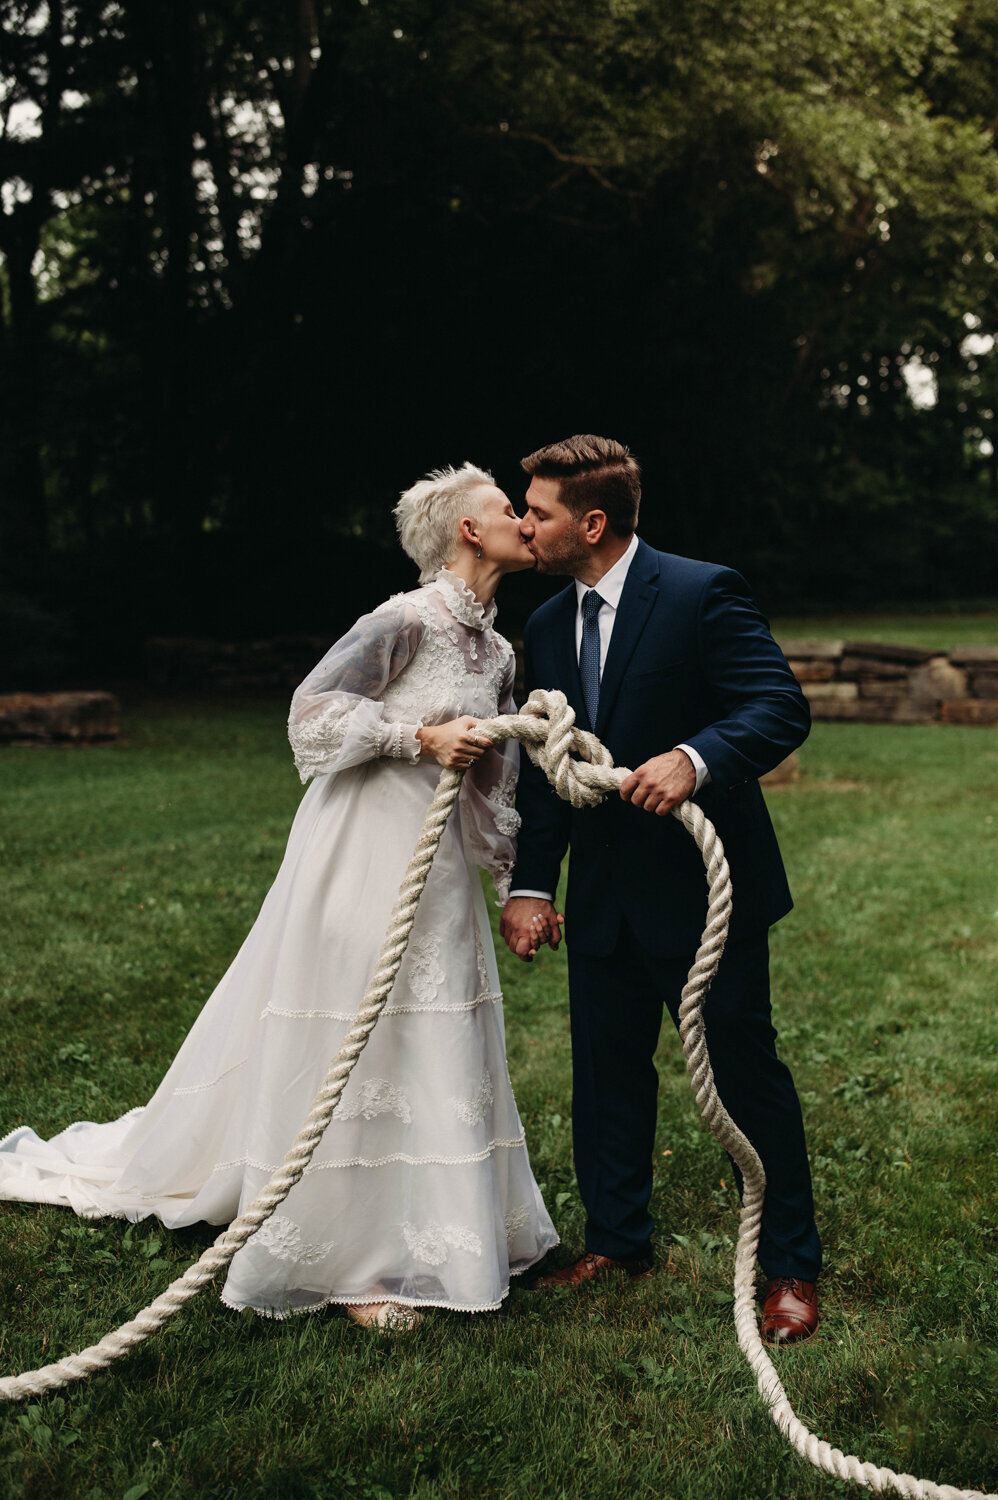 Couple eloped and tied the literal knot on summer ohio wedding day.